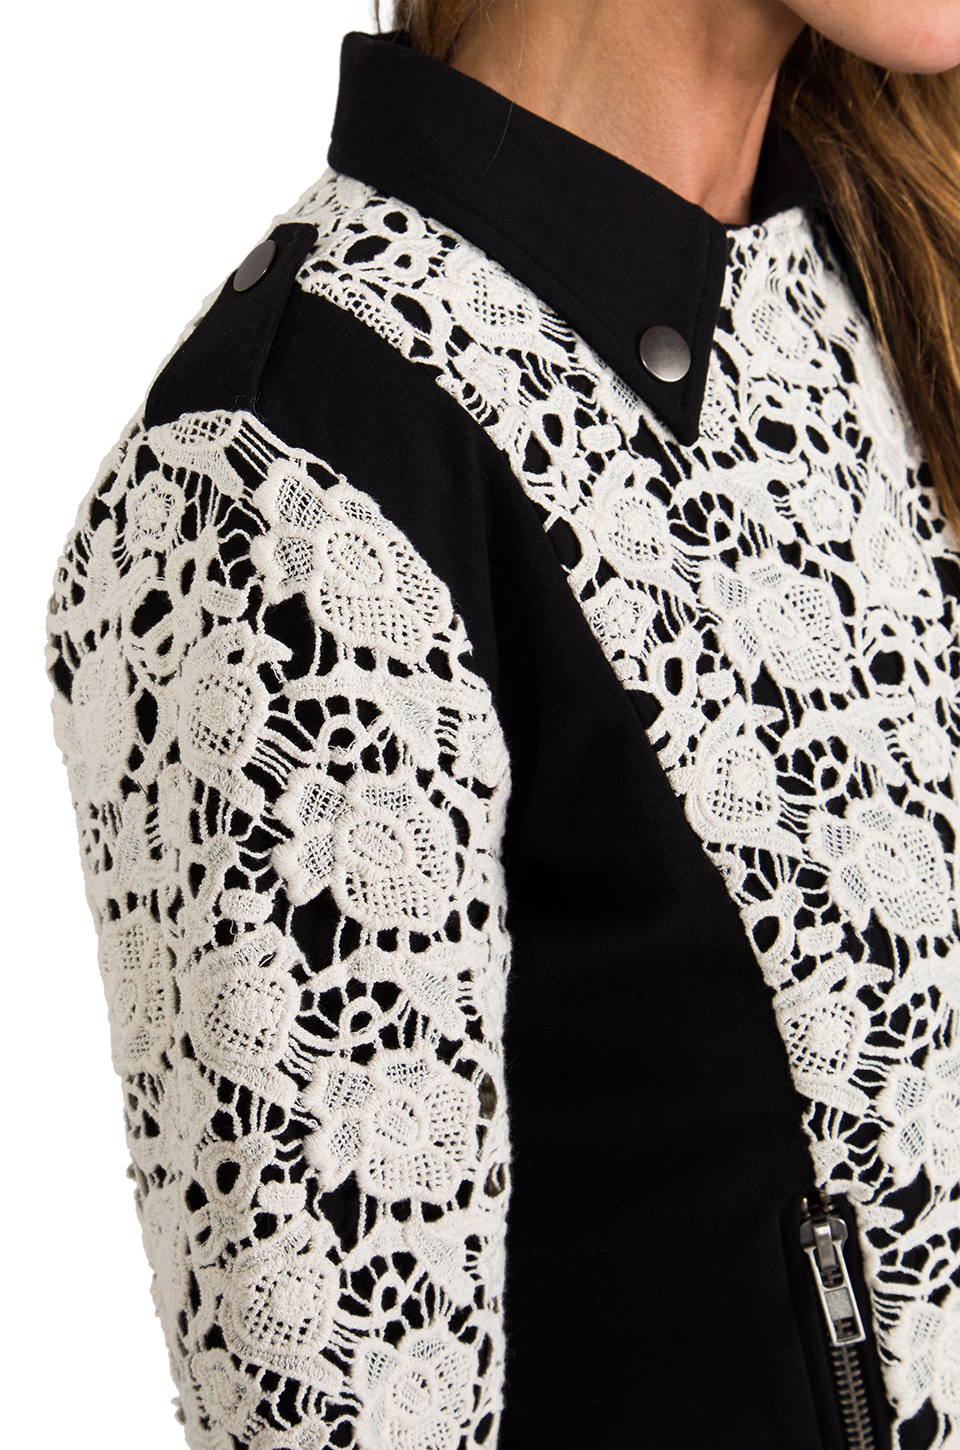 Lyst - Chaser X Revolve Lace Moto Jacket in White